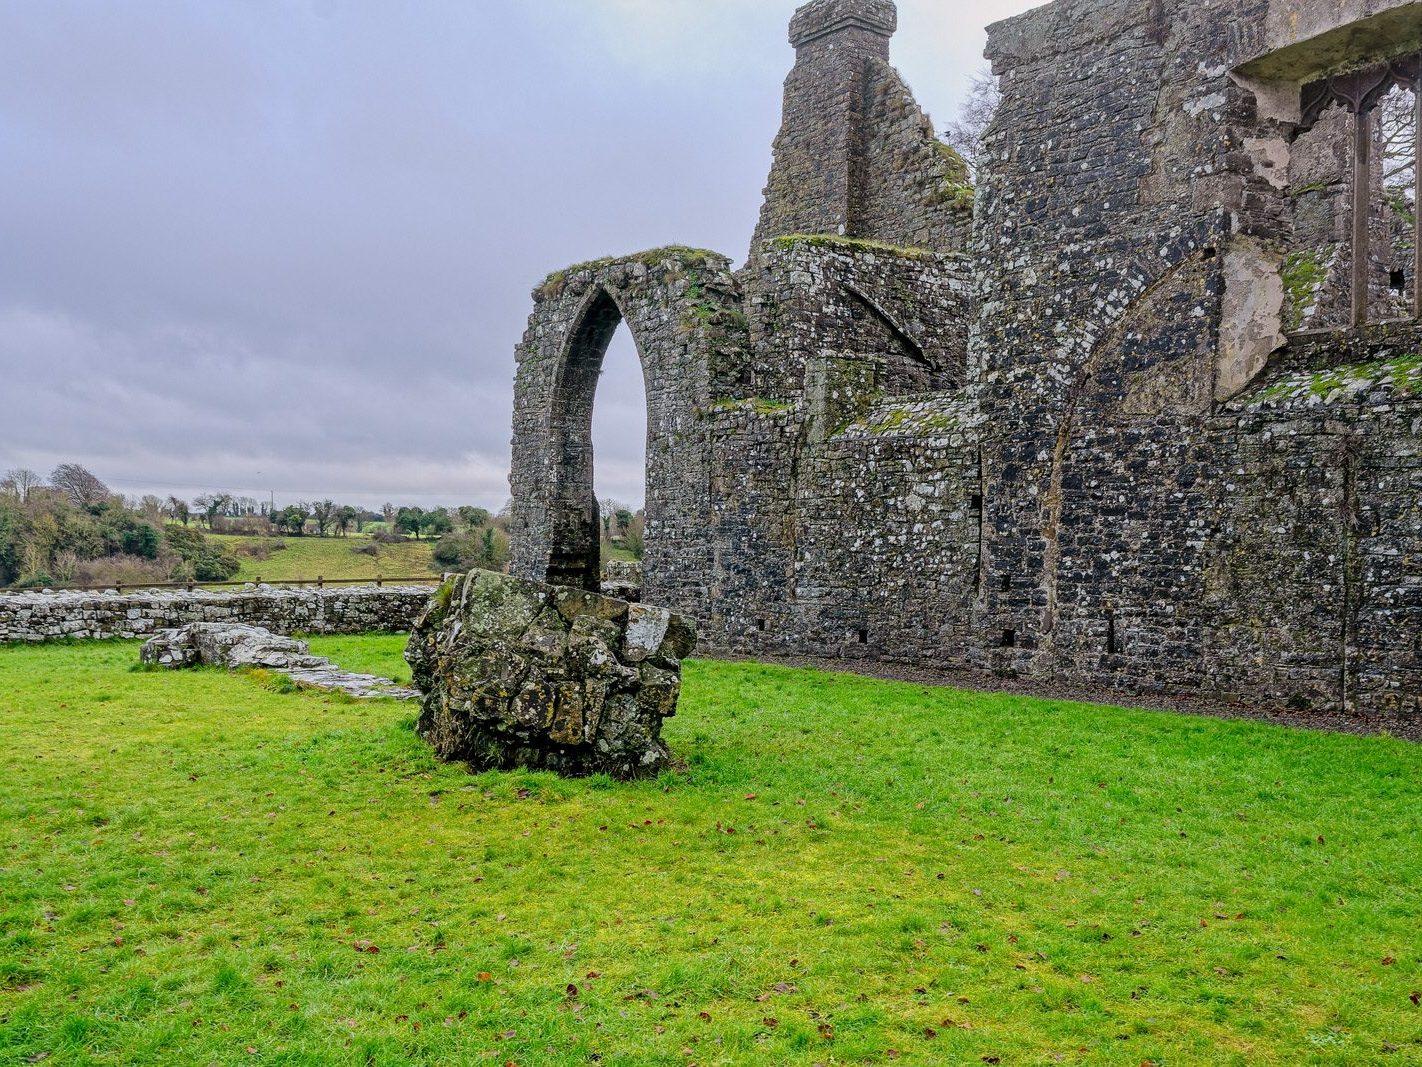 BECTIVE ABBEY WHICH I VISITED LAST CHRISTMAS [THERE WERE NO OTHER VISITORS AS IT WAS A VERY WET DAY]--225238-1